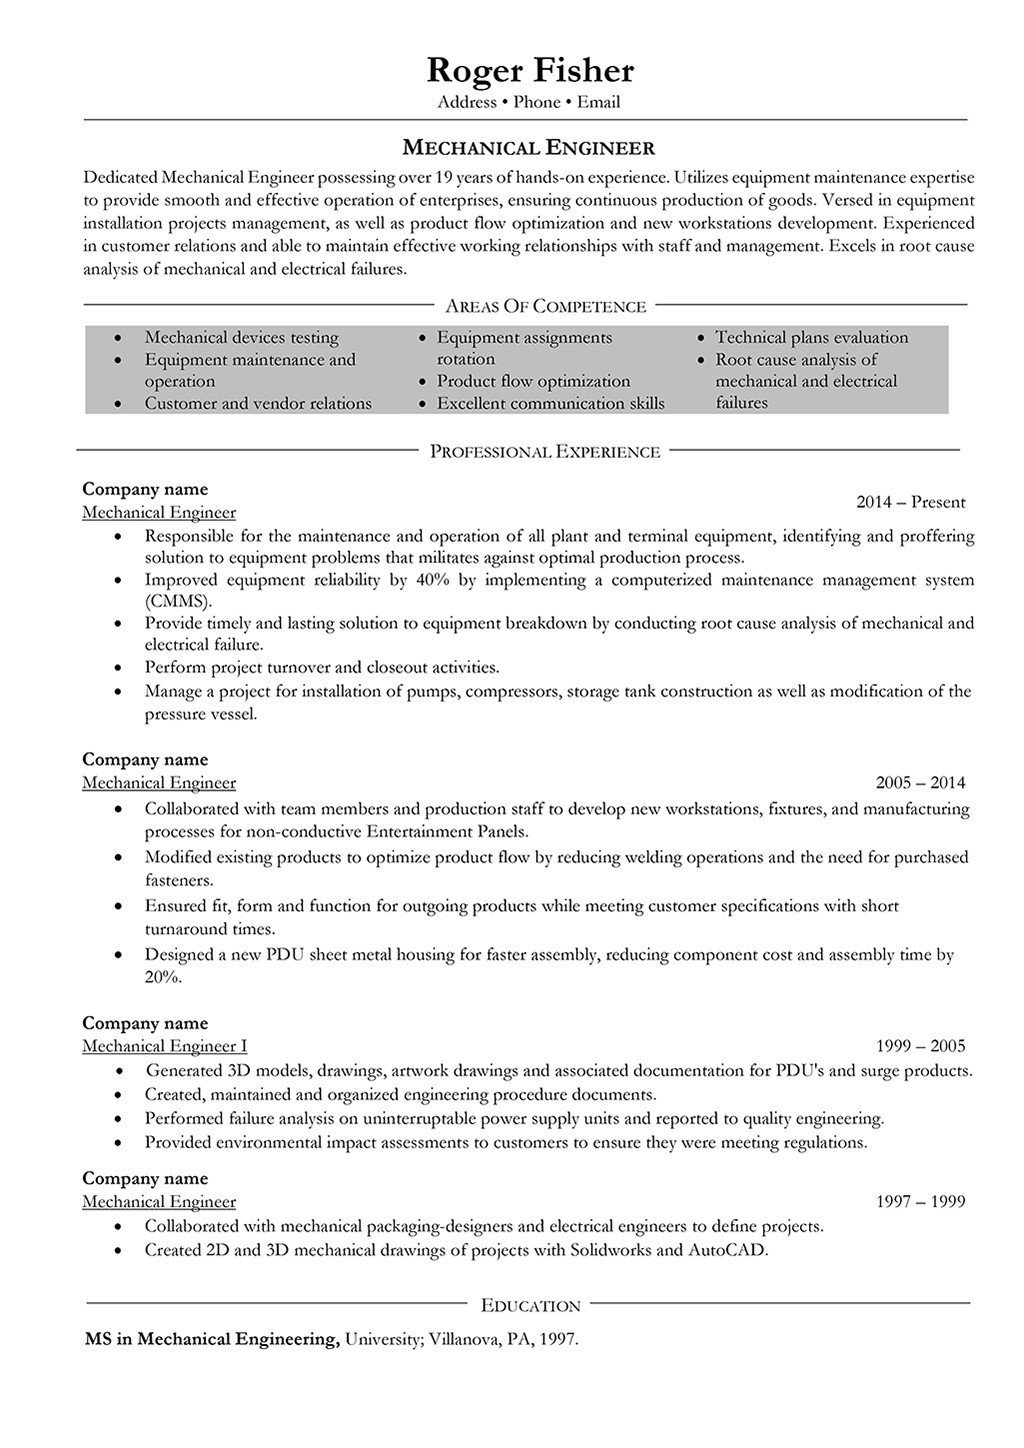 Mechanical Engineering Resume Template Mechanical Engineer Resume Samples and Writing Guide [10